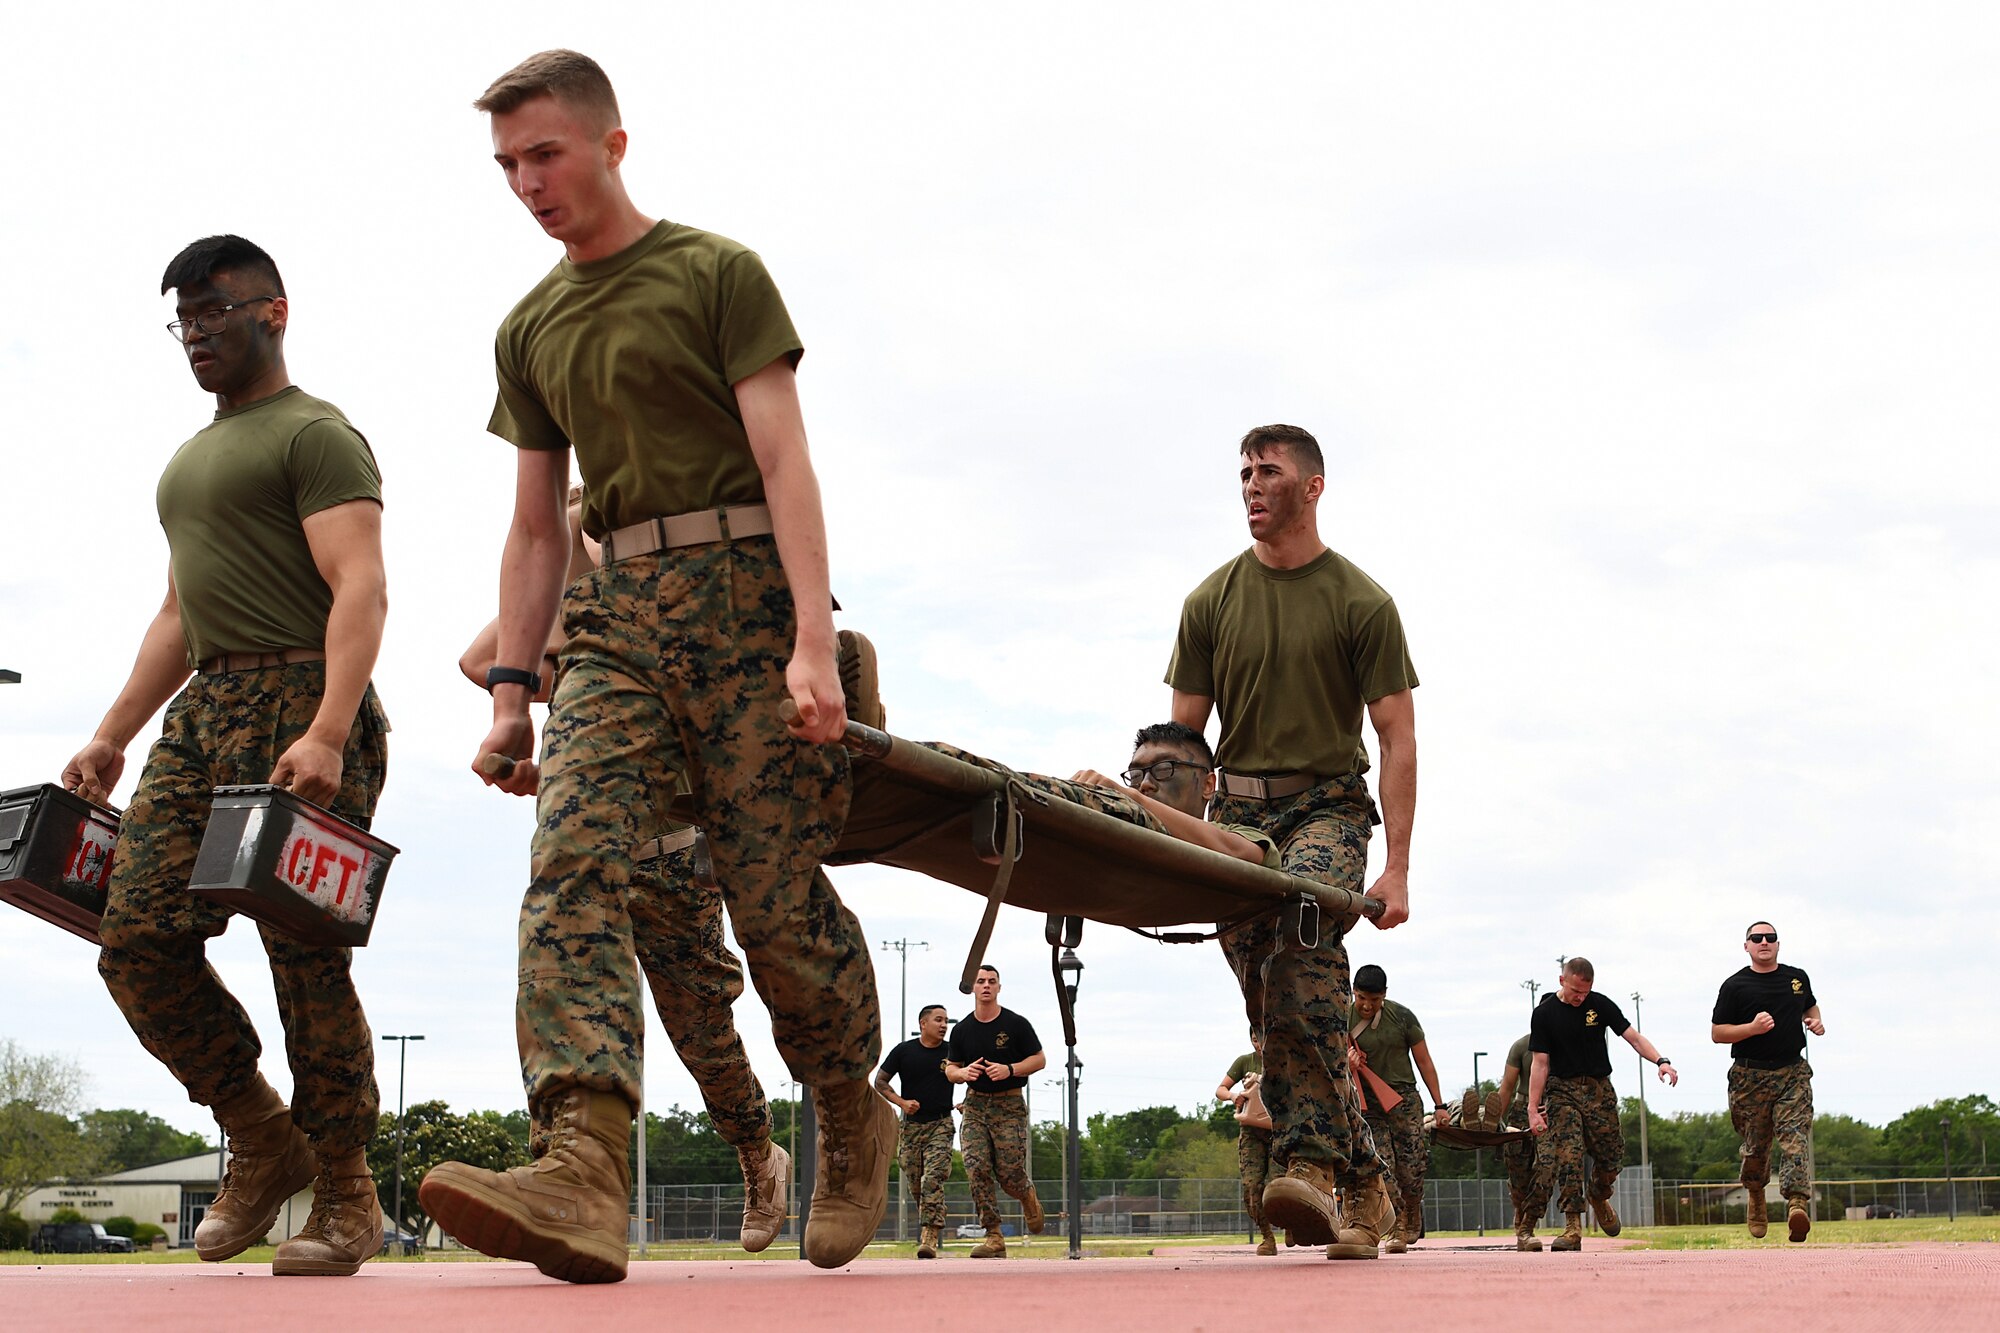 Members of the Keesler Marine Detachment participate in a timed casualty evacuation race during the 2nd Annual Warrior Day at the Triangle Track at Keesler Air Force Base, Mississippi, April 6, 2018. The race included carrying a team member on a stretcher, transporting ammo cans and water jugs. The event served to promote unit cohesion, camaraderie and small unit leadership. (U.S. Air Force photo by Airman 1st Class Suzie Plotnikov)